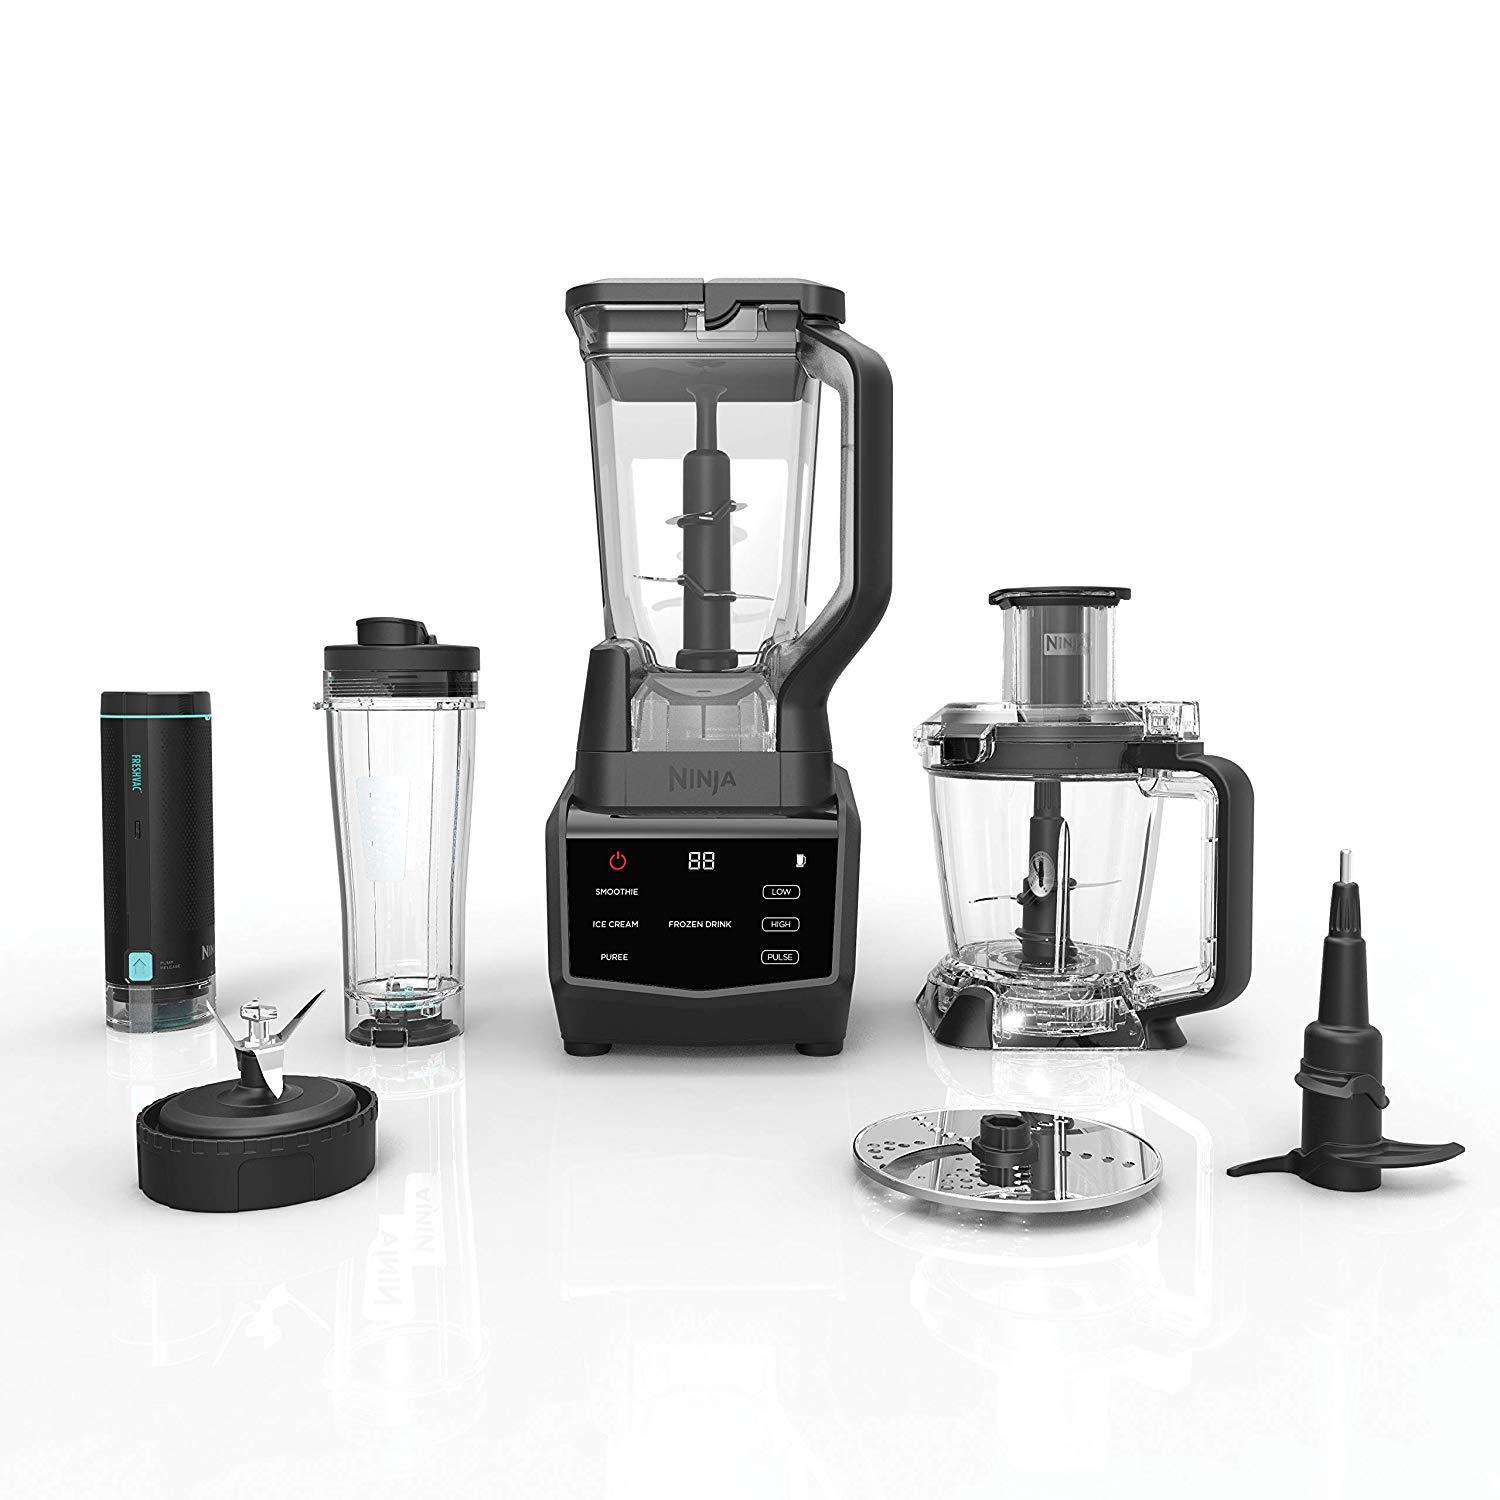 Ninja Smart Screen Blender and Food Processor with FreshVac Technology shipped from Amazon 22% off